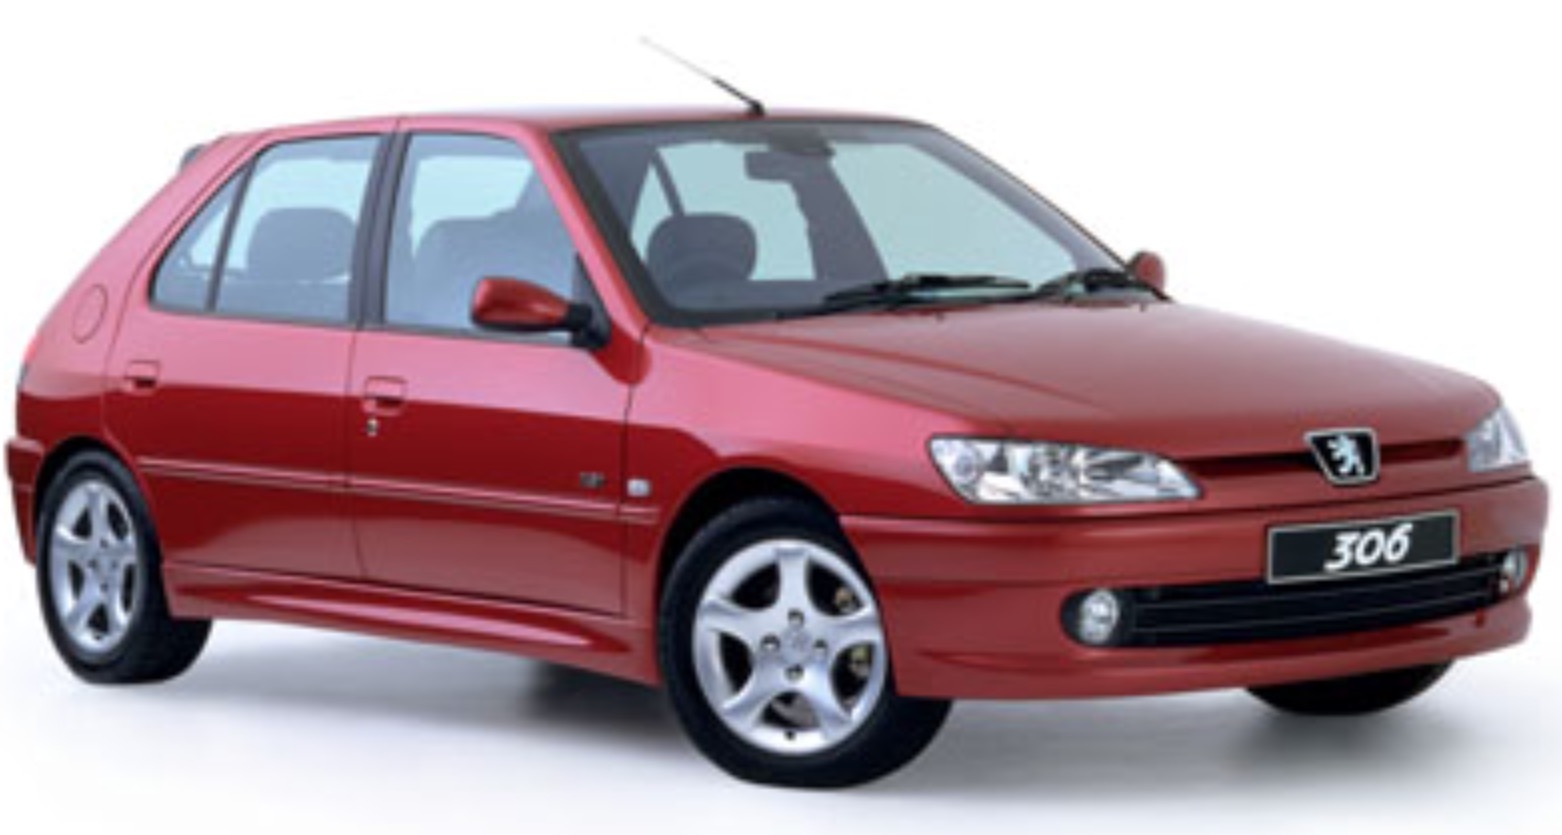 High Quality Tuning Files Peugeot 306 1.4 HDI 70hp